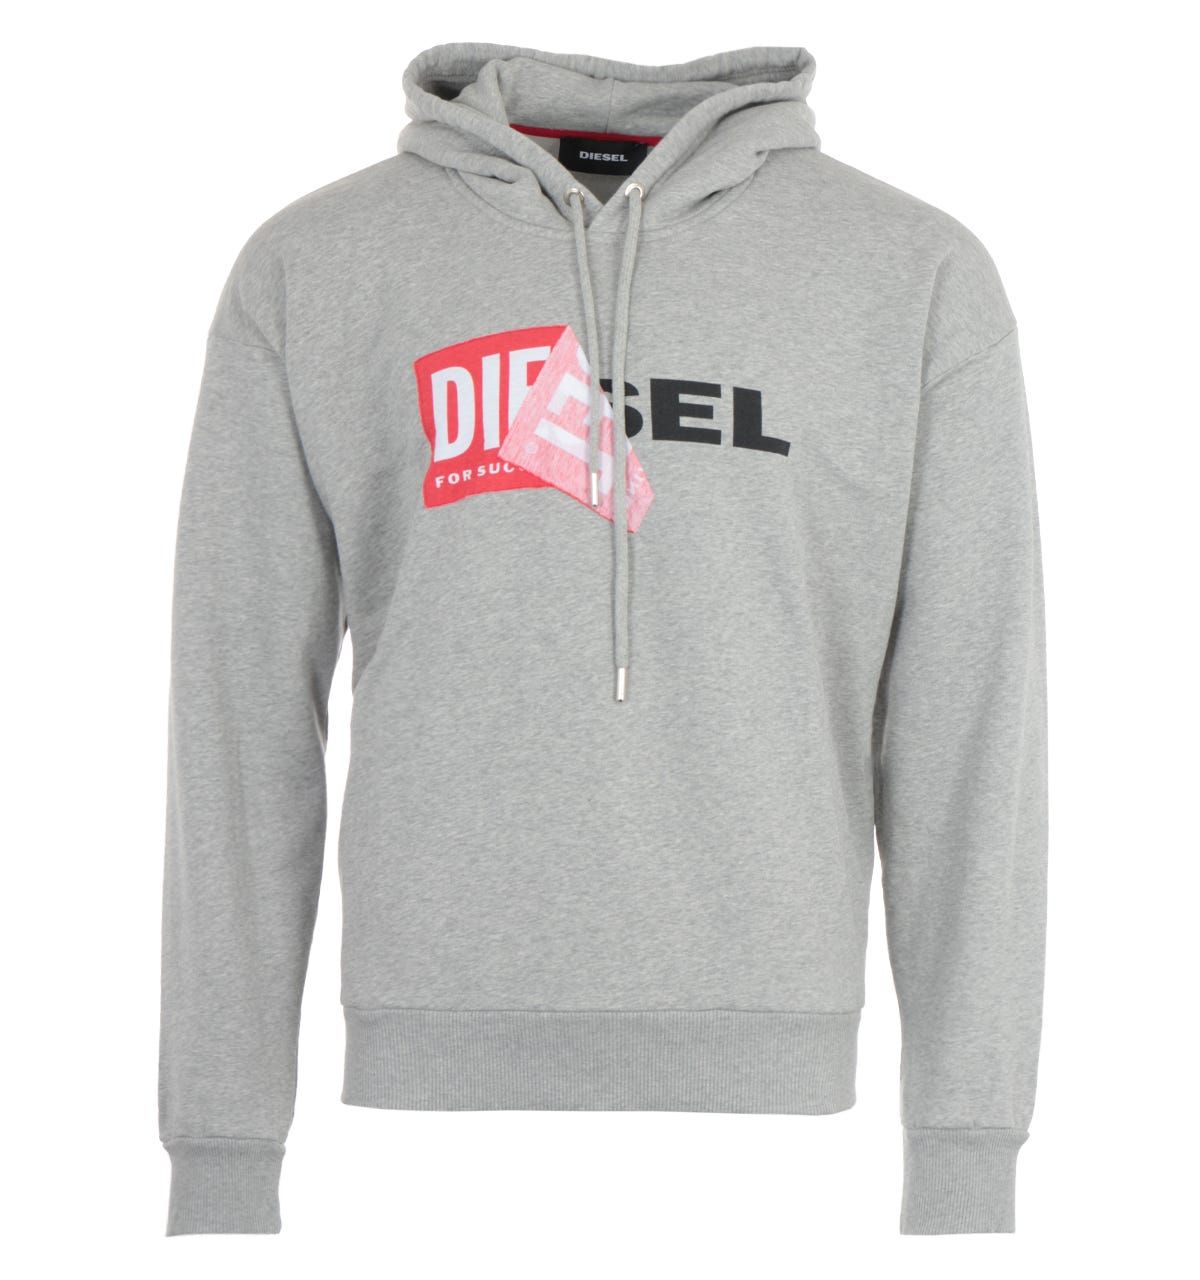 Crafted from pure smooth cotton, this hooded sweatshirt from Diesel is an ideal piece to refresh your wardrobe. Cut in an oversized fit for an effortless relaxed look. Featuring an adjustable drawstring hood and ribbed trims. Finished with the original Diesel logo in red with the brand new logo in black underneath, printed across the chest.Oversized Fit, Pure Cotton Composition , Adjustable Drawstring Hood, Ribbed Cuffs & Hemline, Diesel Branding. Style & Fit:Oversized Fit, Fits True to Size. Composition & Care:100% Cotton, Machine Wash.